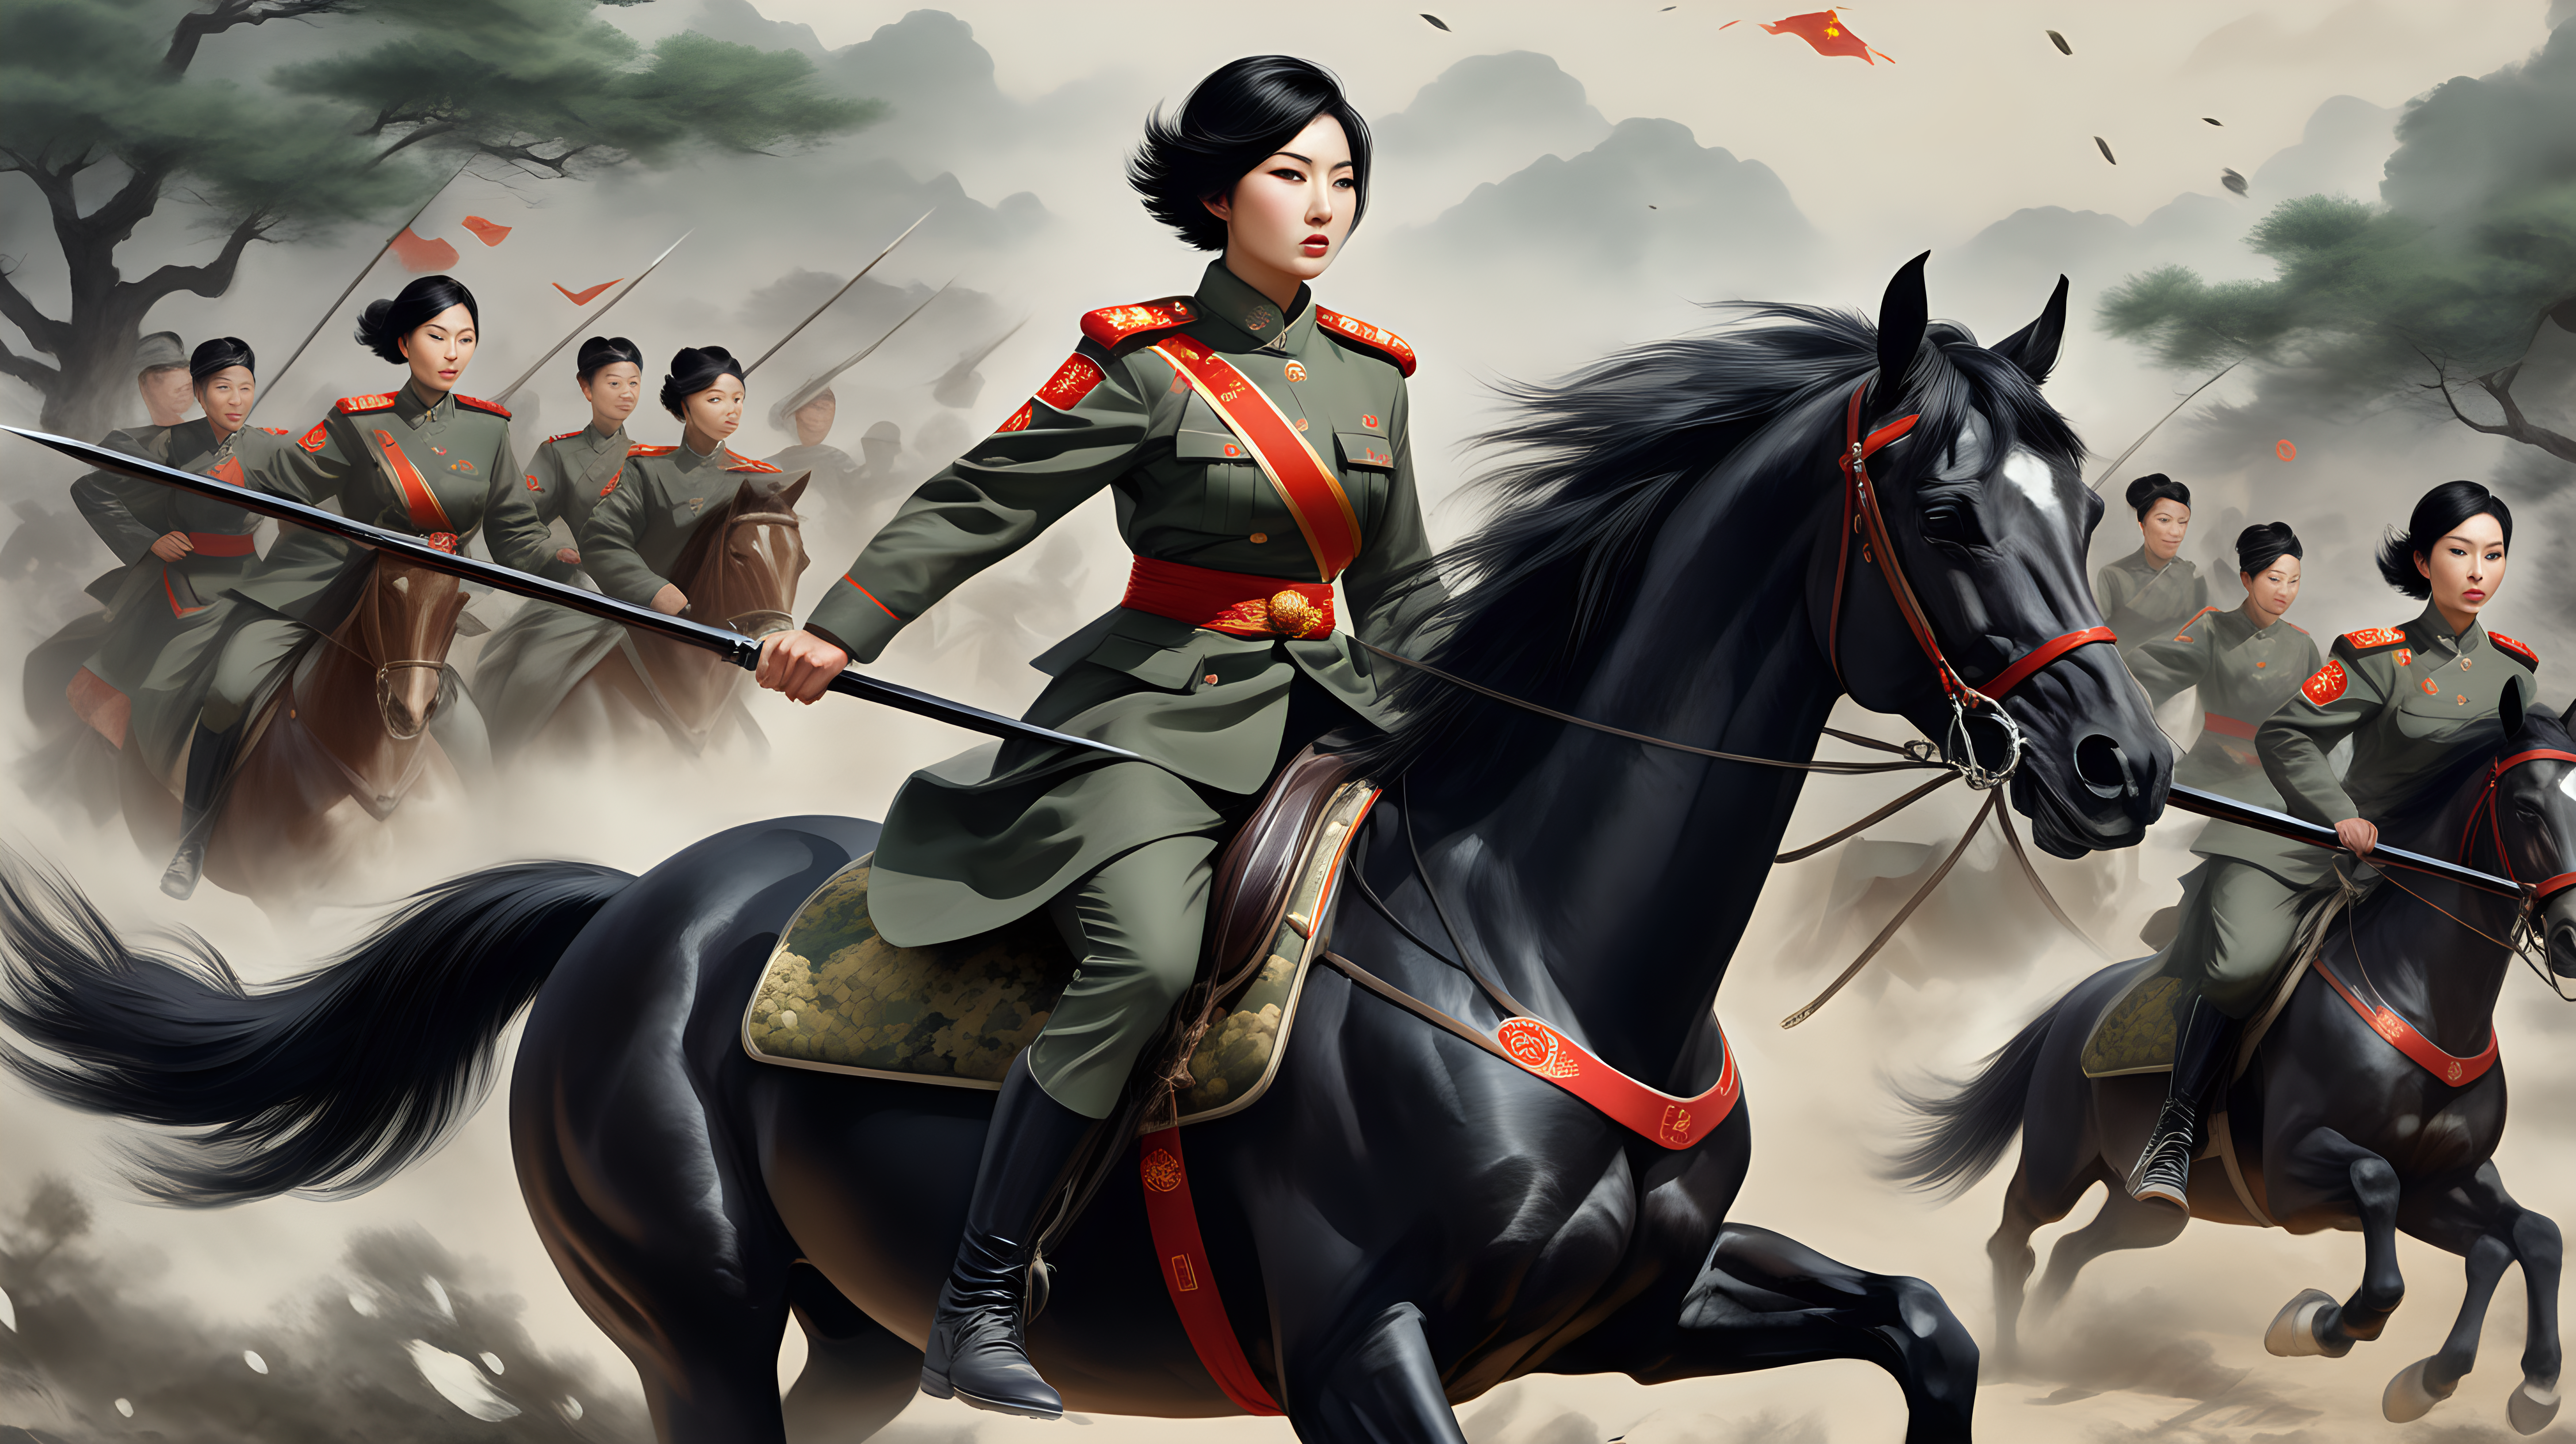 Chinese female soldiersShort hairBlack hairCamouflage leggingsRiding a horseHolding